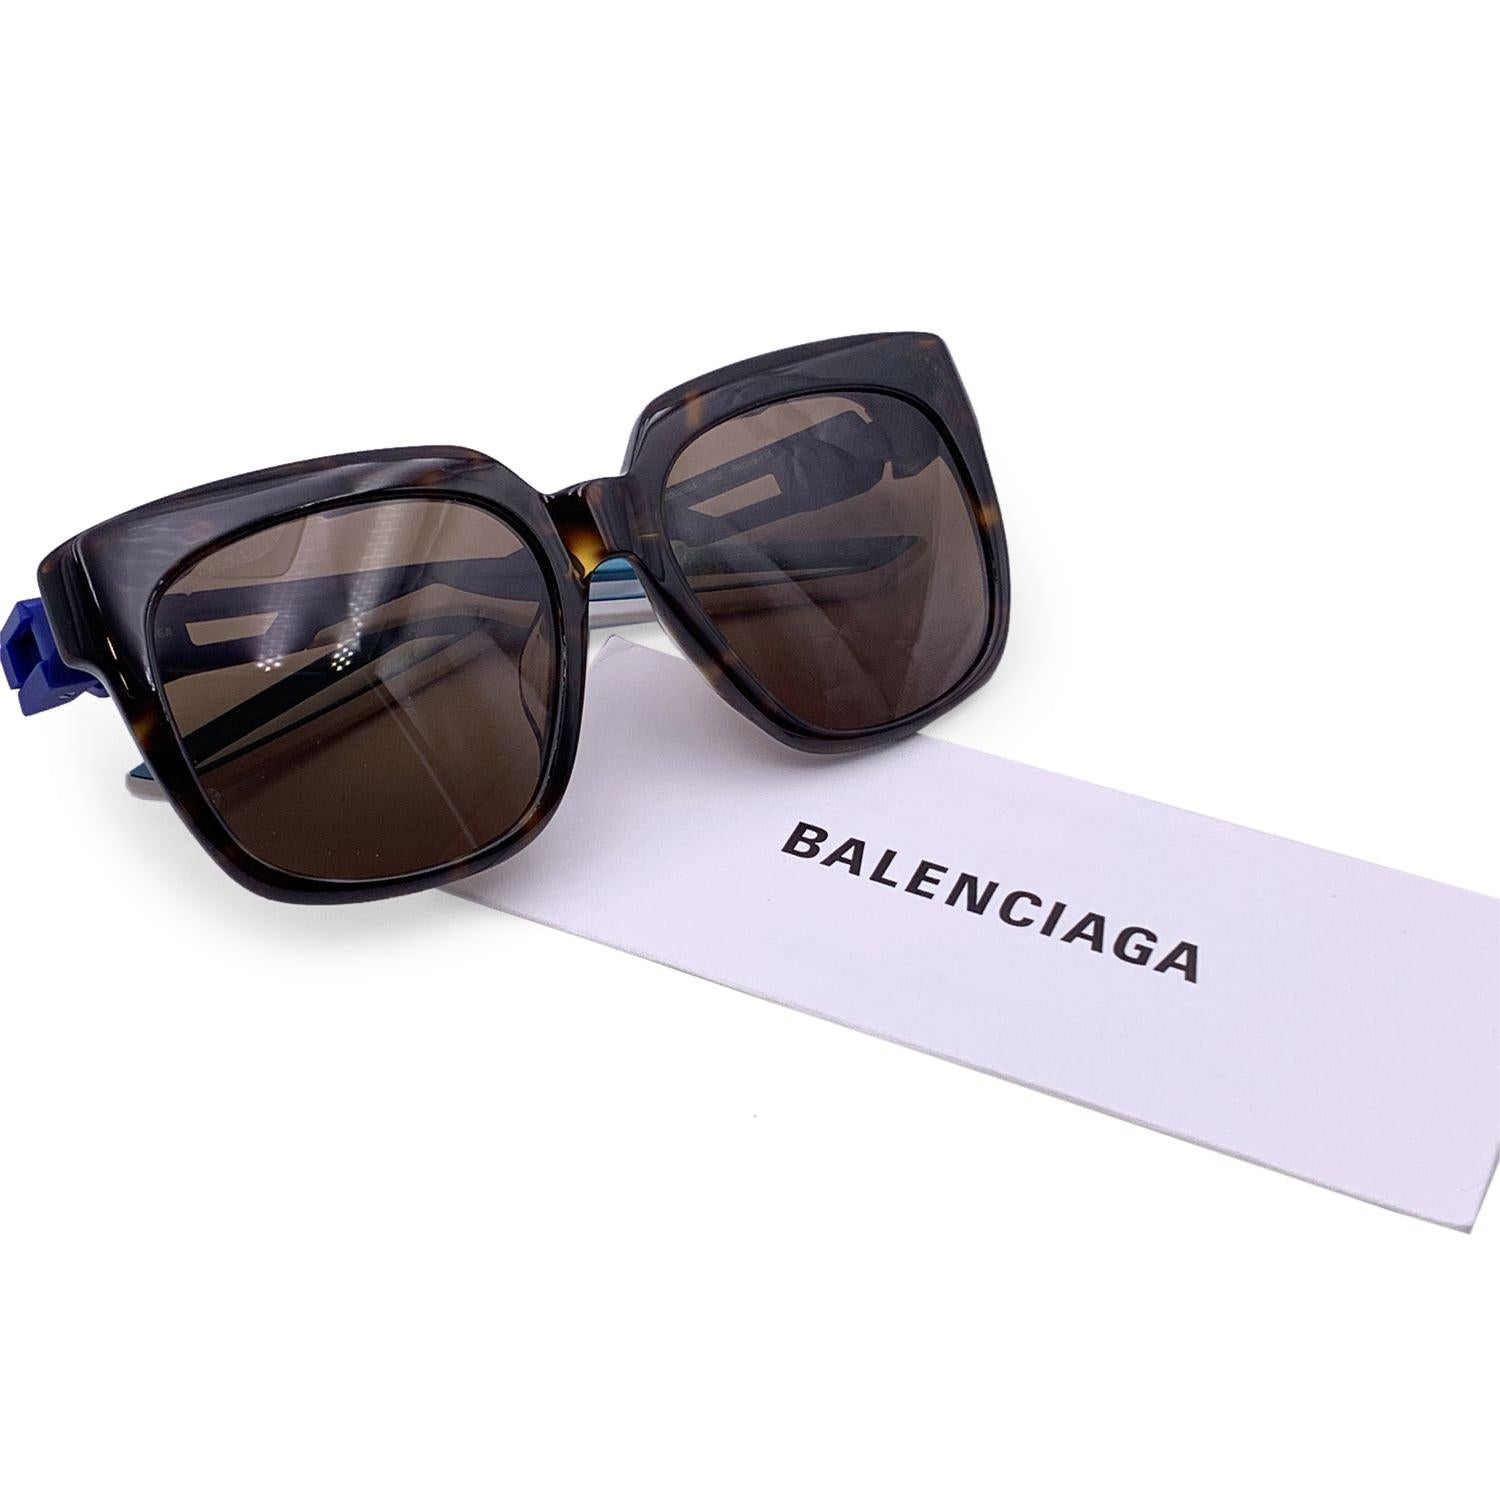 Balenciaga TripleS BB0025S sunglasses in color 002 brown. Squared brown havana acetate frame and brown lenses. Blue and white rubber effect temples with a black logo. Mod & refs: BB0025SA - 002 - 55/19 - 135. Made in Italy Details MATERIAL: Plastic